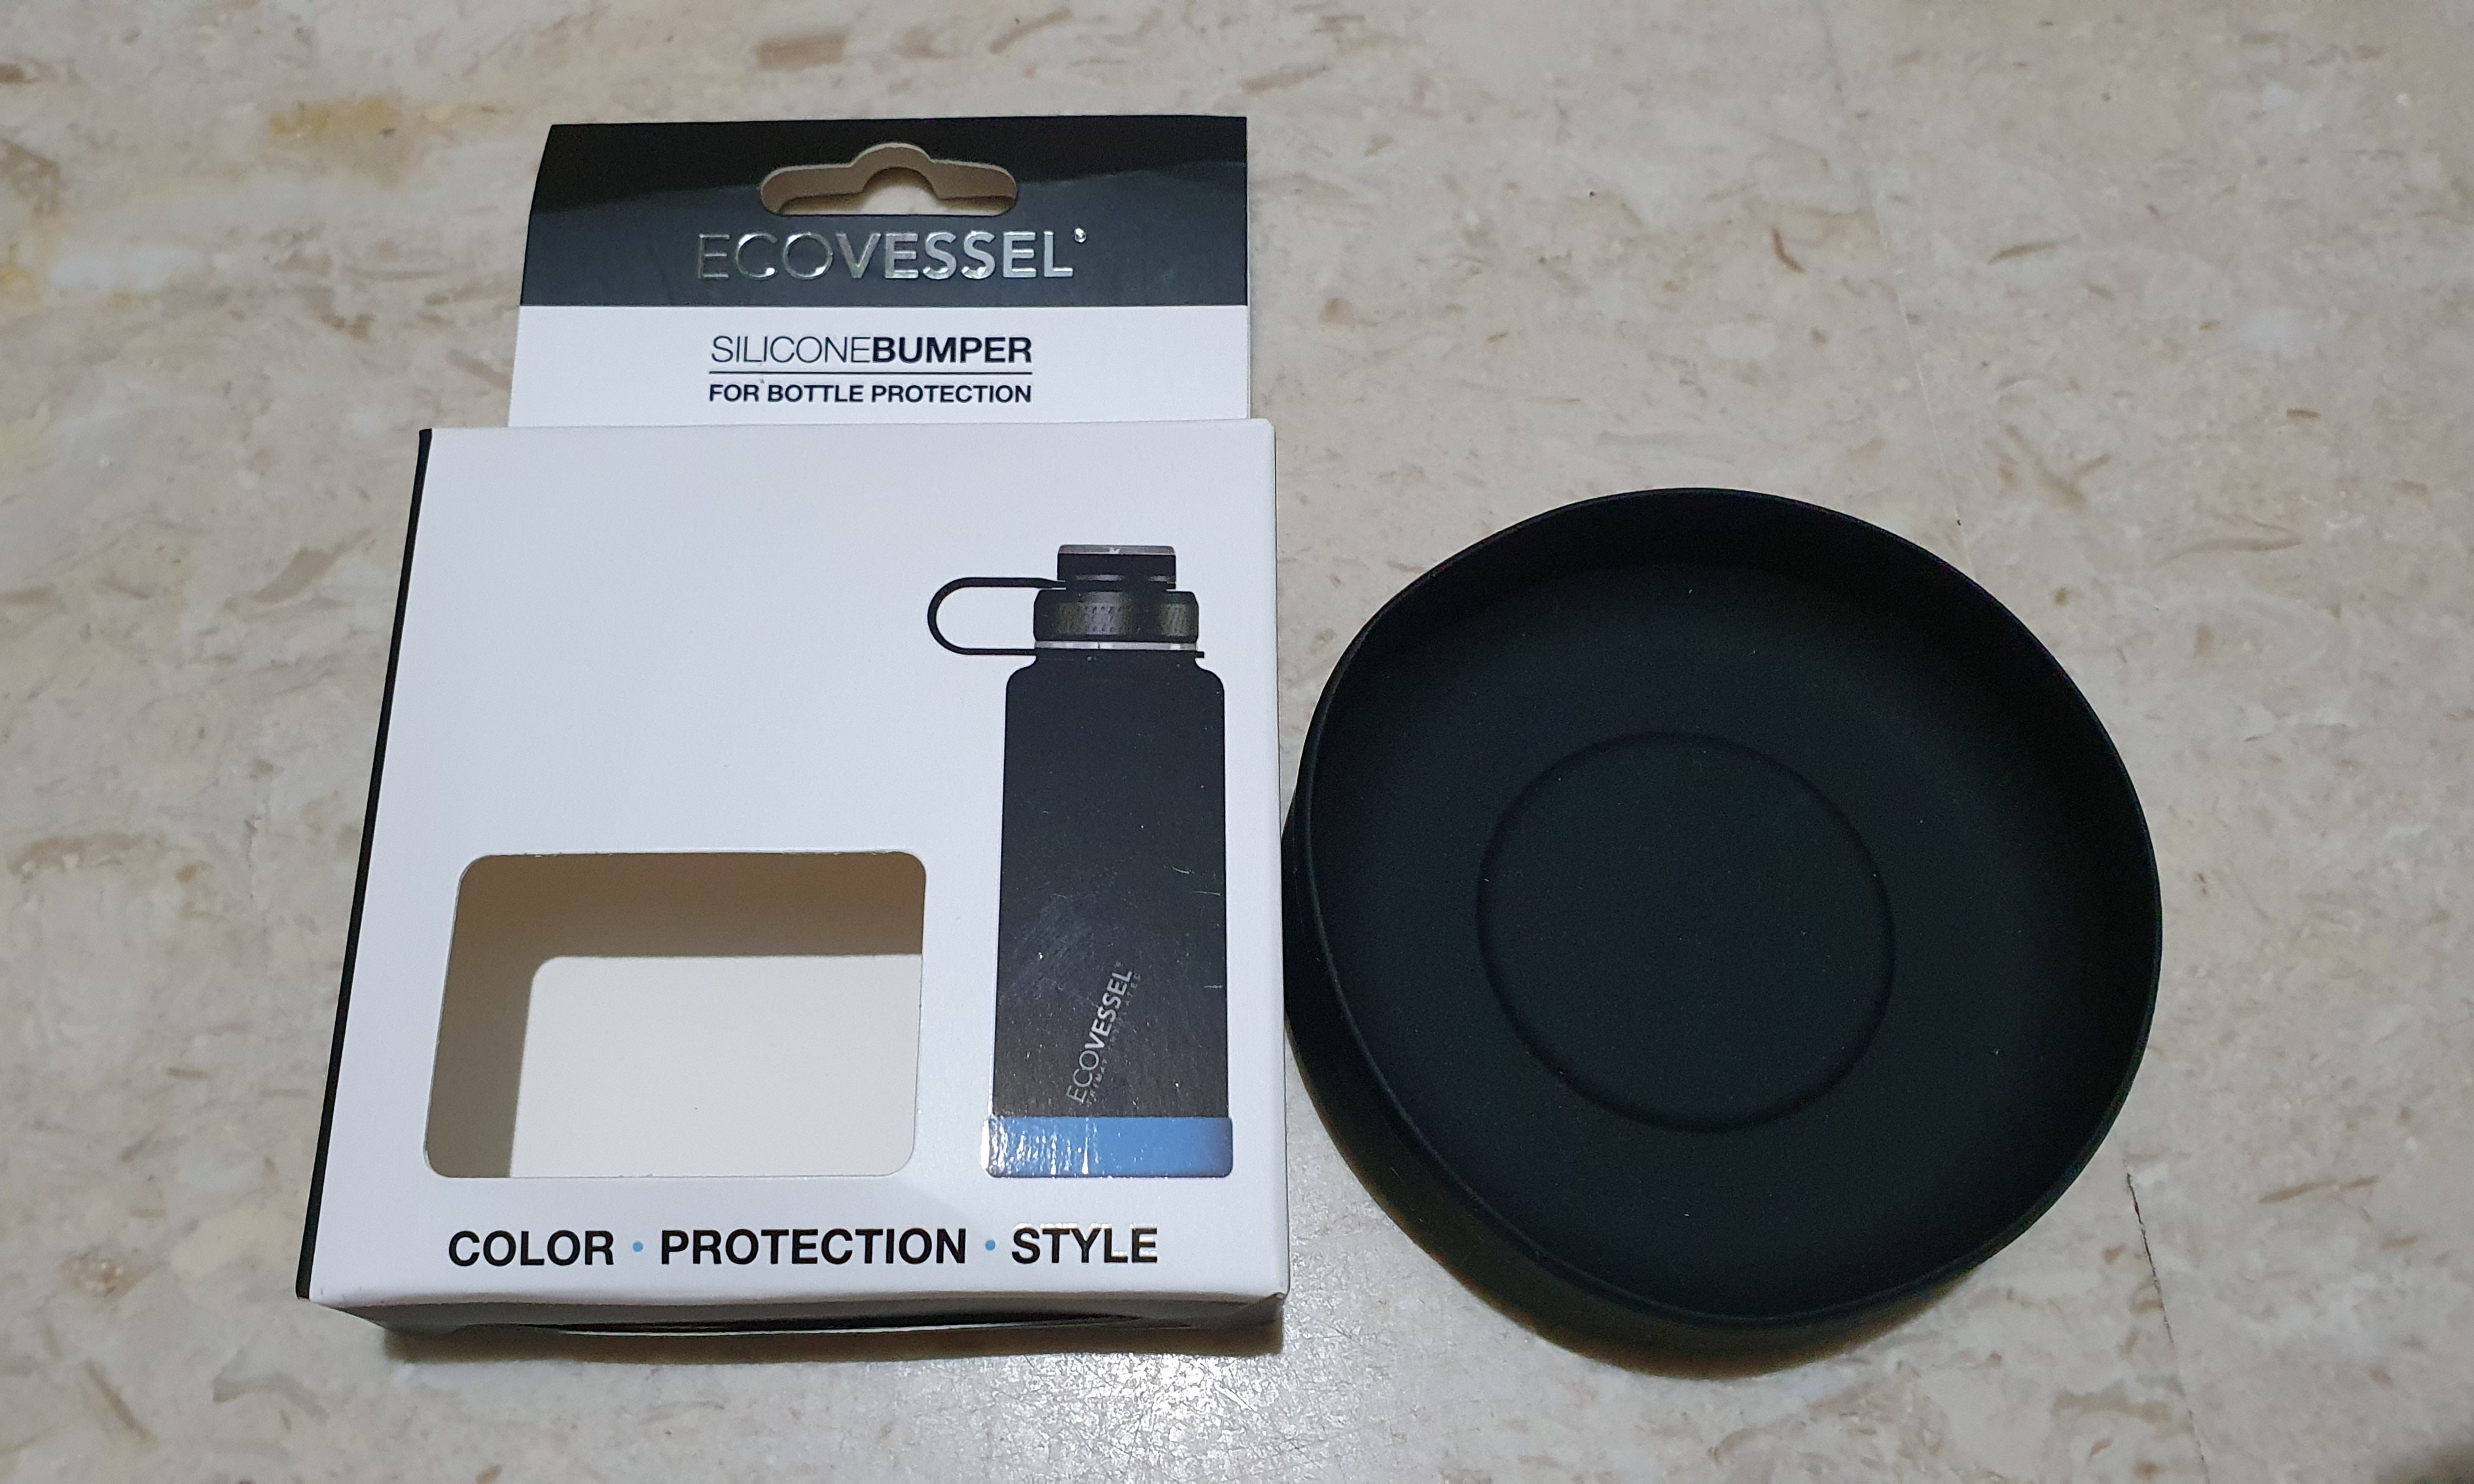 https://media.karousell.com/media/photos/products/2020/11/8/ecovessel_silicone_bumper_for__1604805690_52b9b1f4.jpg